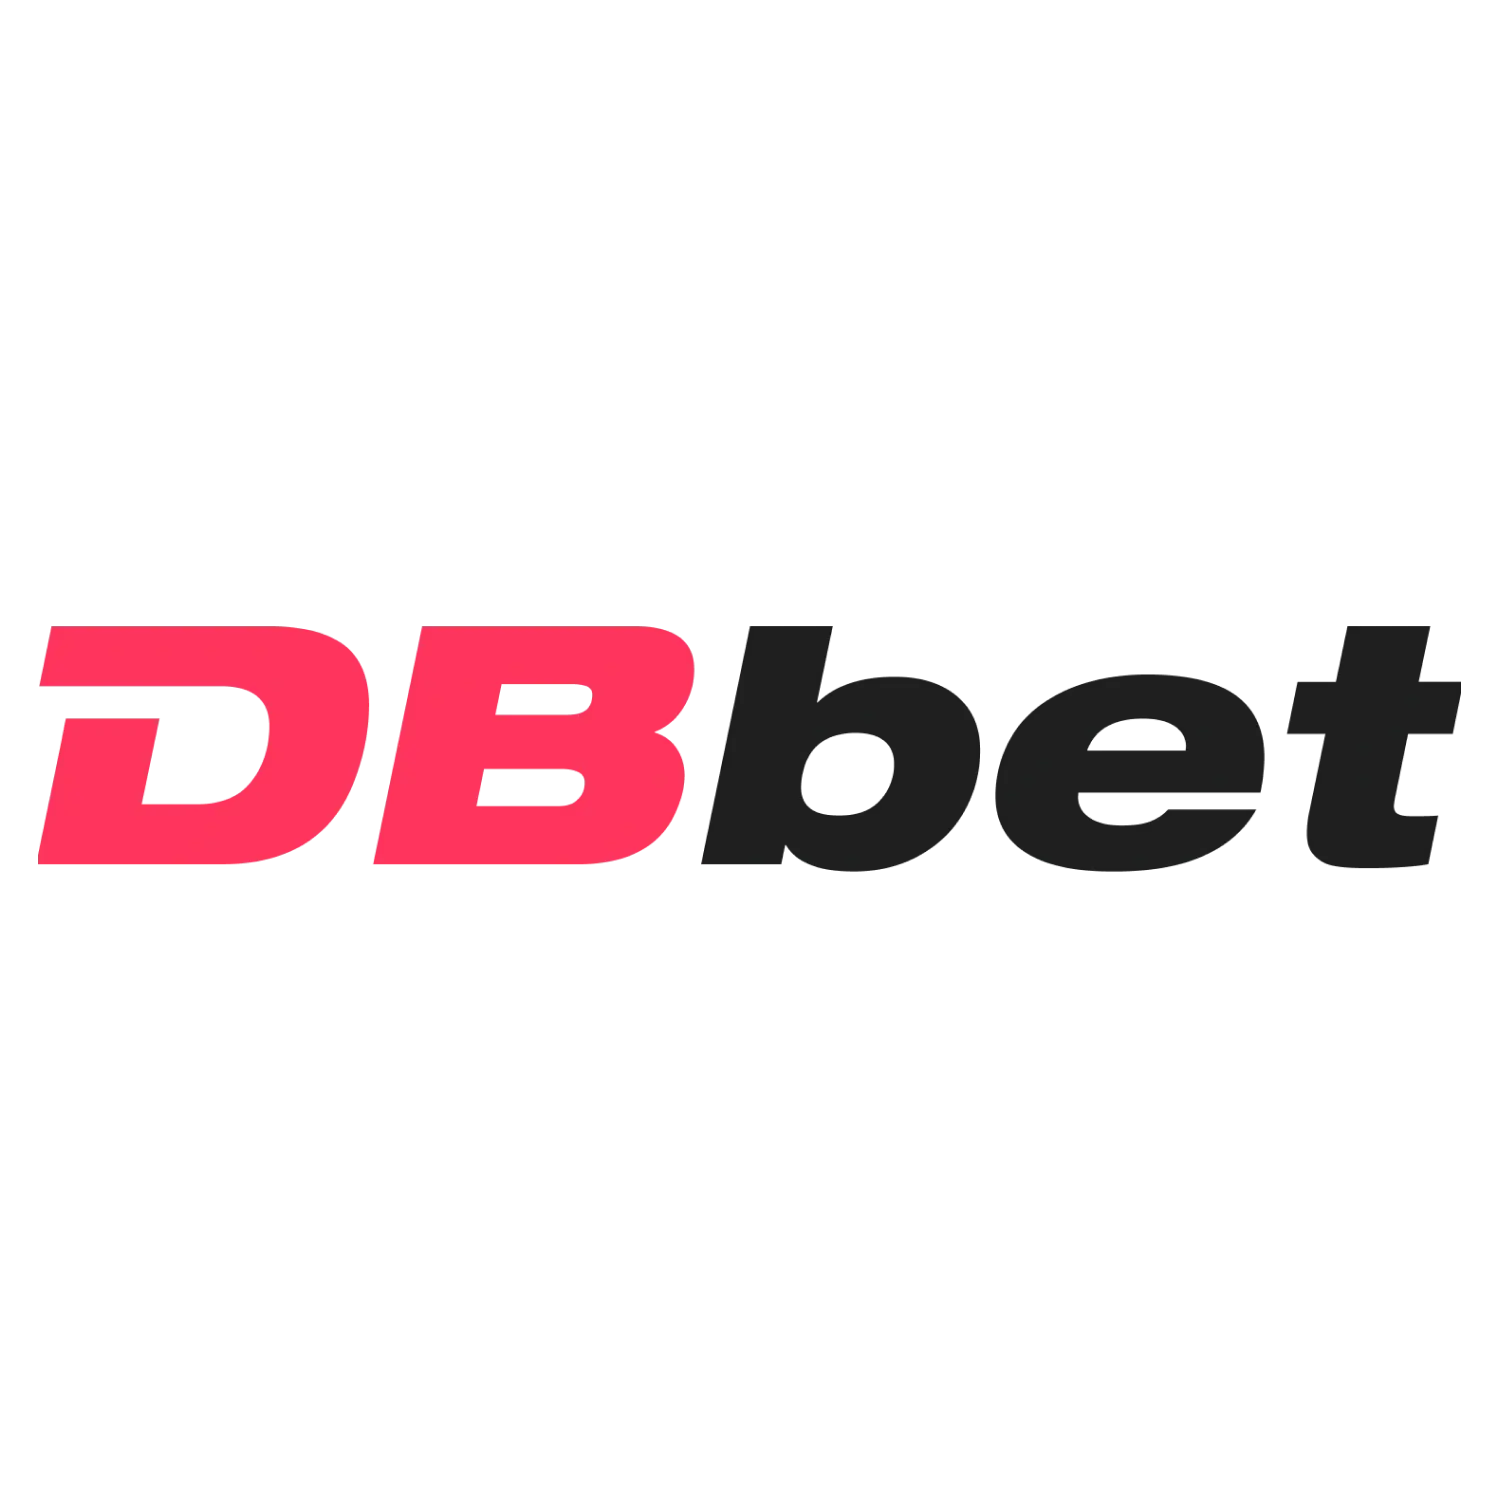 Double Bet betting site in Bangladesh logo.